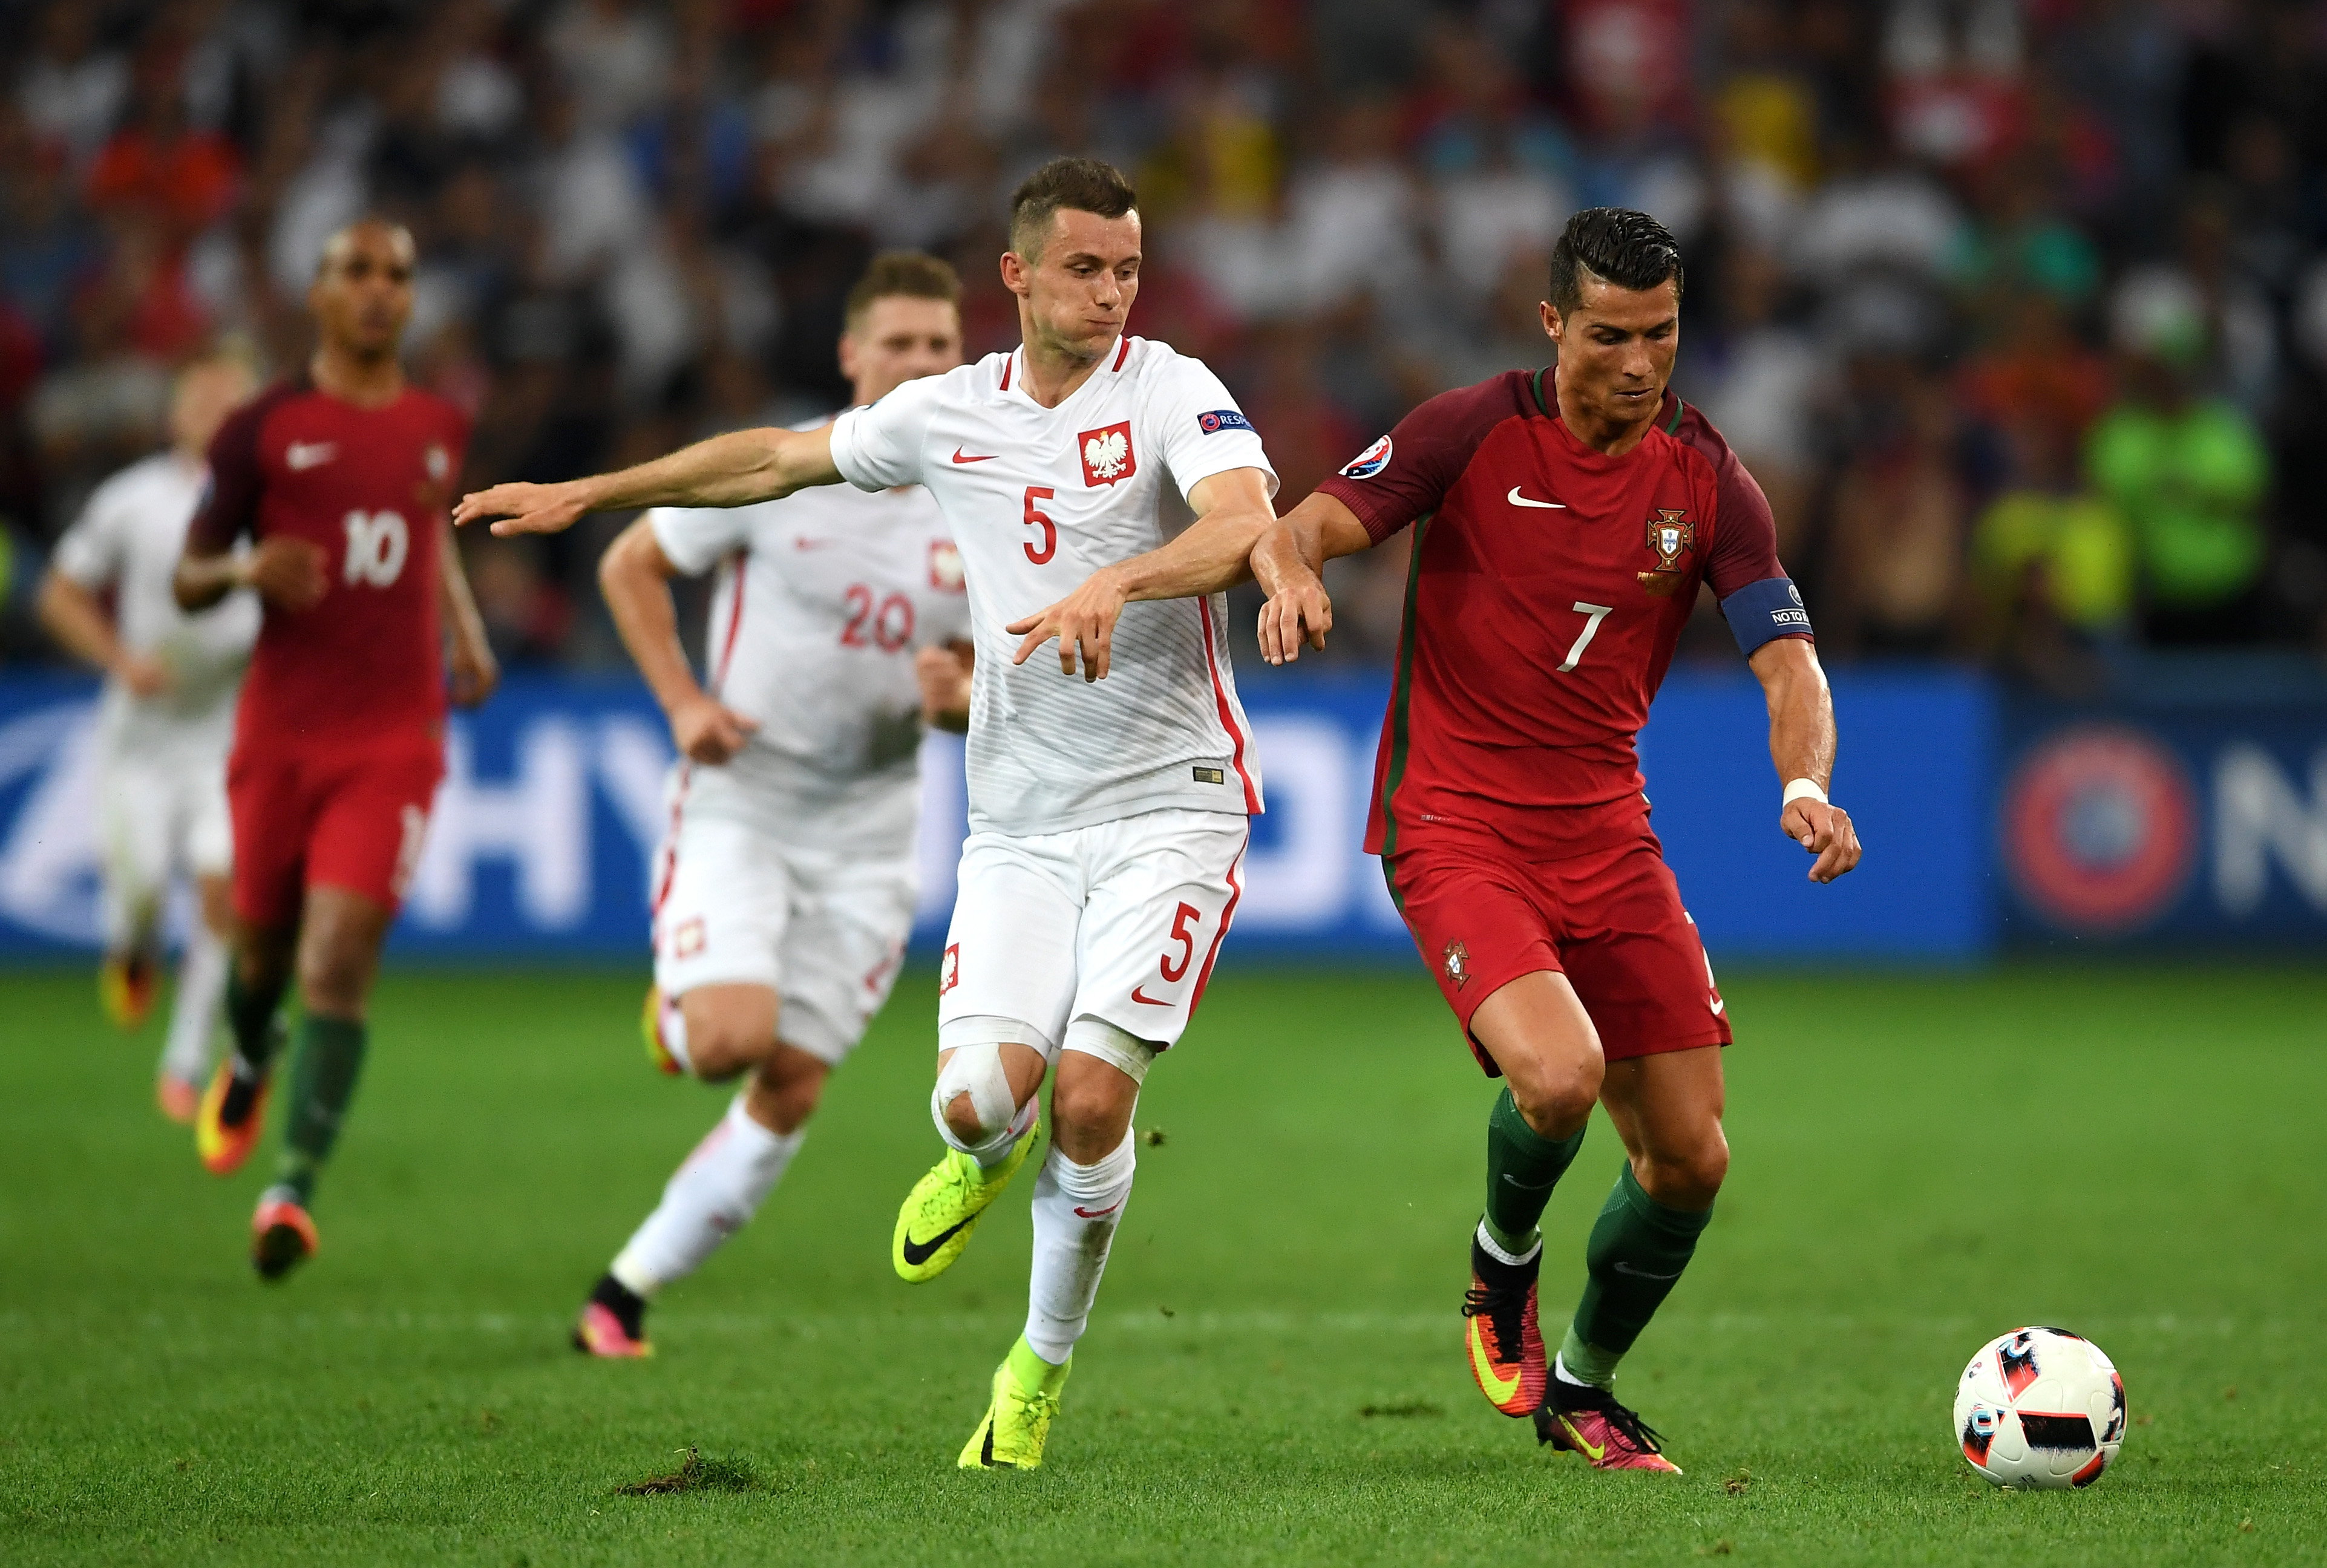 Euro 2016 | Portugal beat Poland in dramatic penalty shootout to enter semis